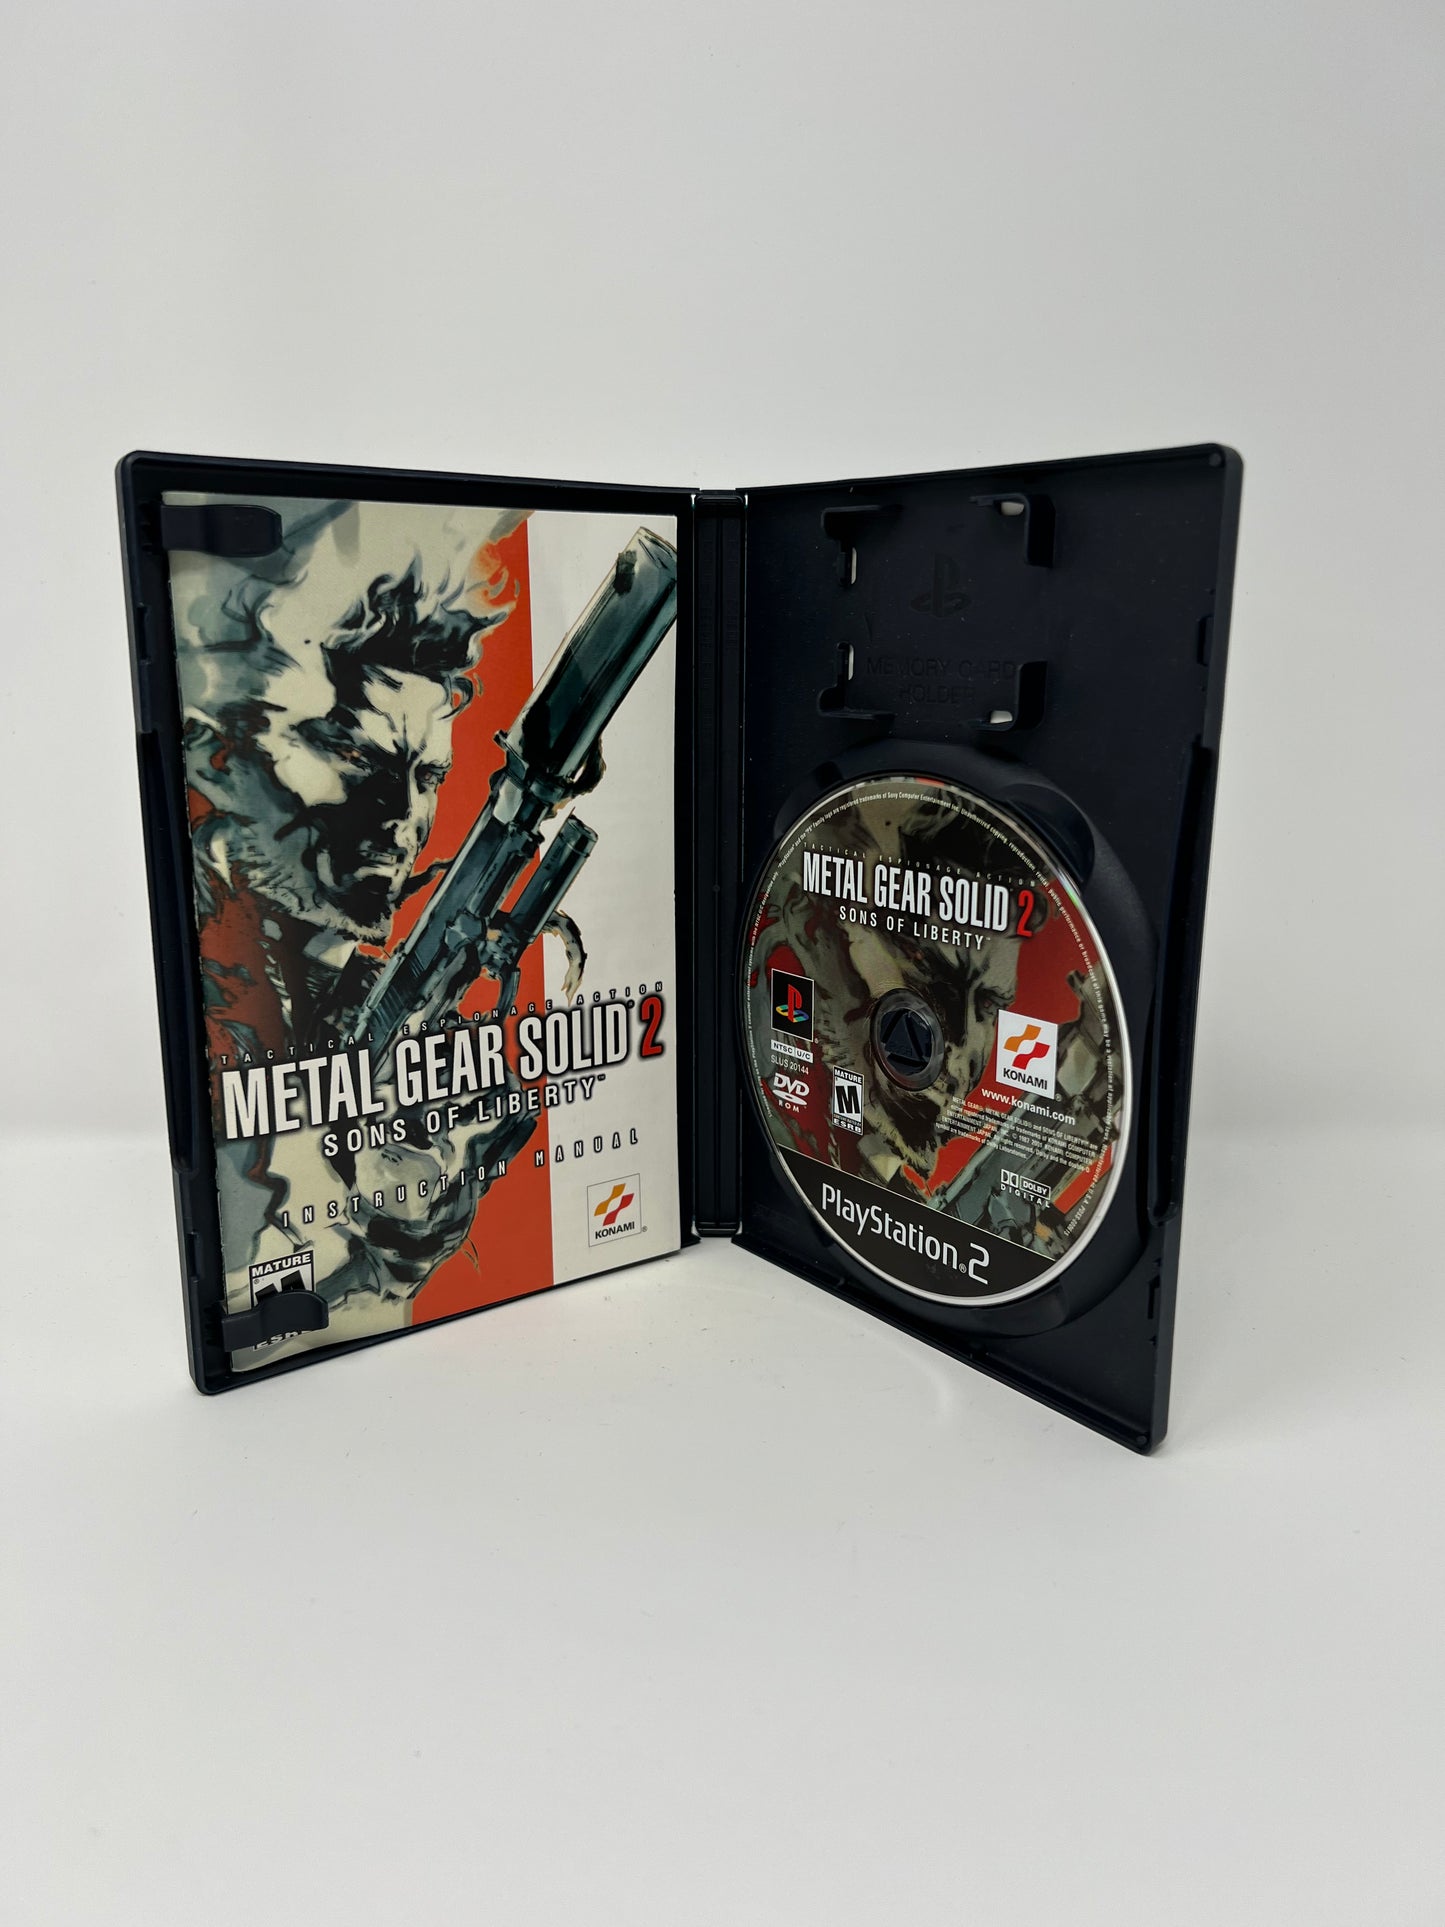 Metal Gear Solid 2 Sons Of Liberty - PS2 Game - Used